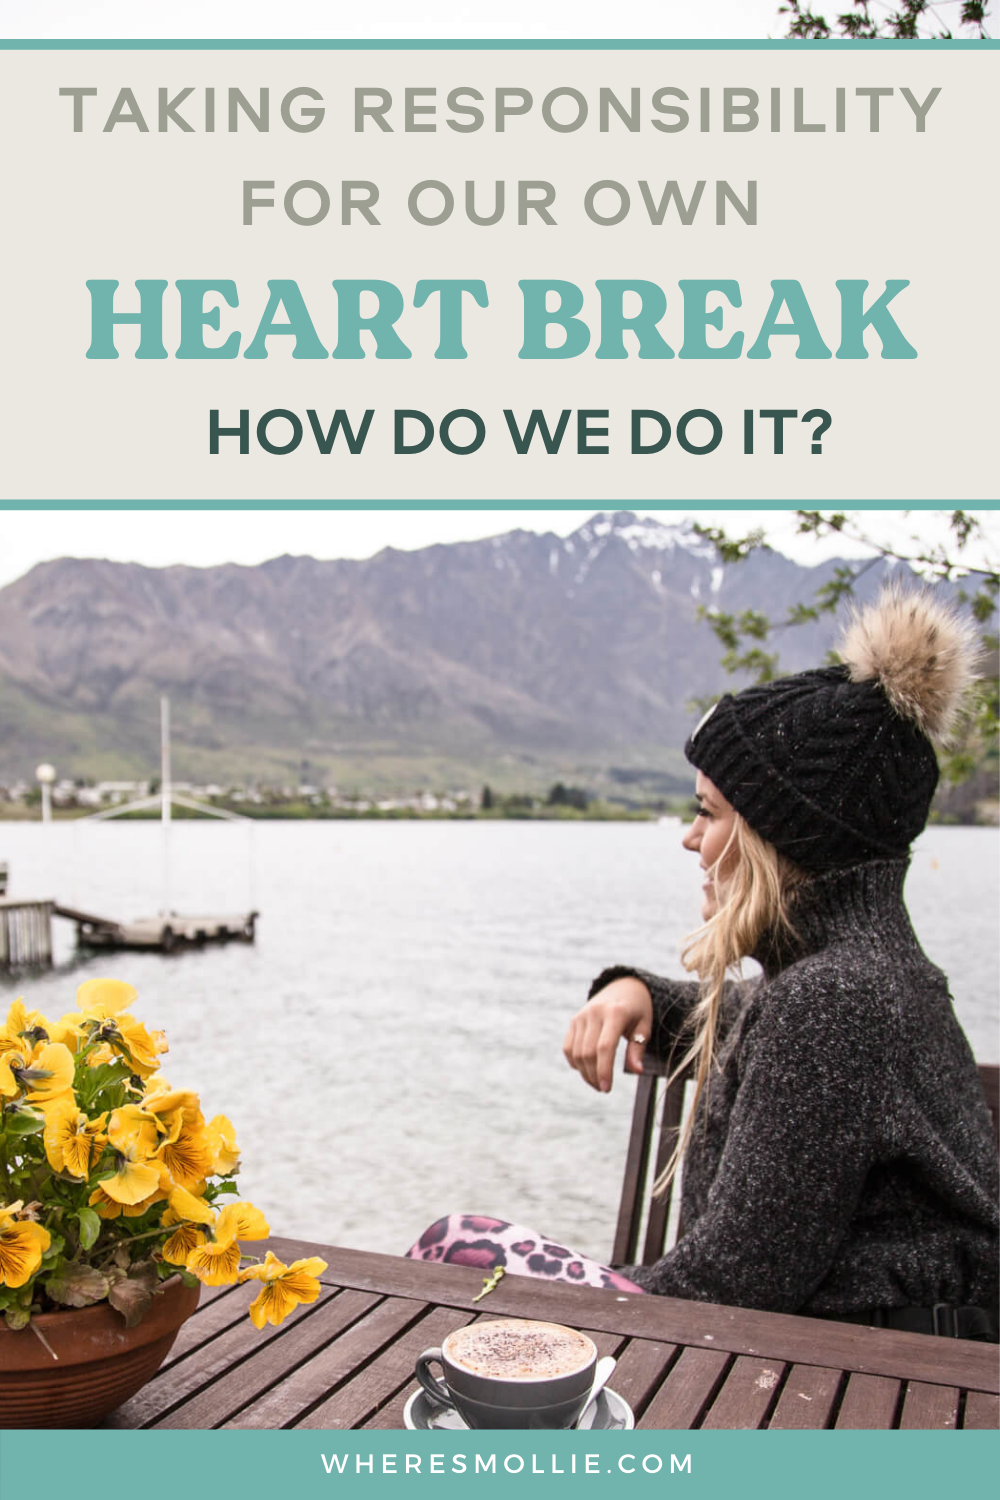 Taking responsibility for your own heartbreak